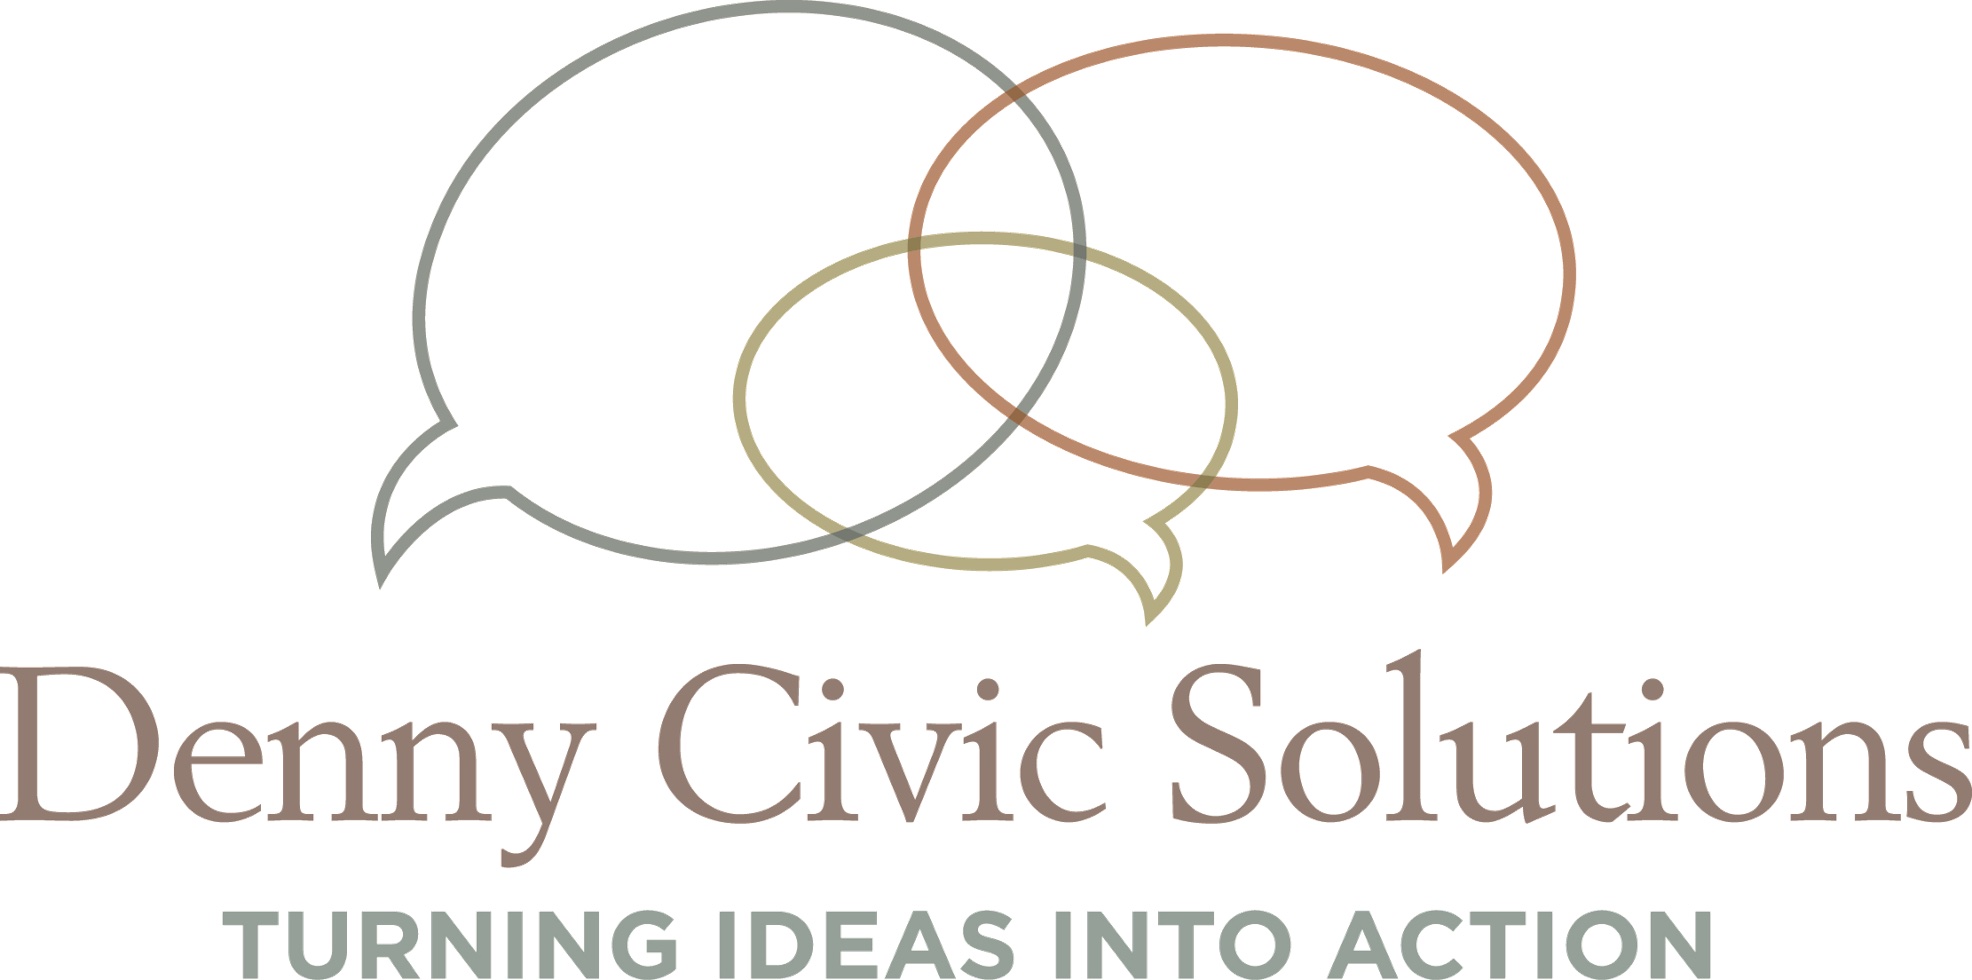 Denny Civic Solutions: Turning ideas into action